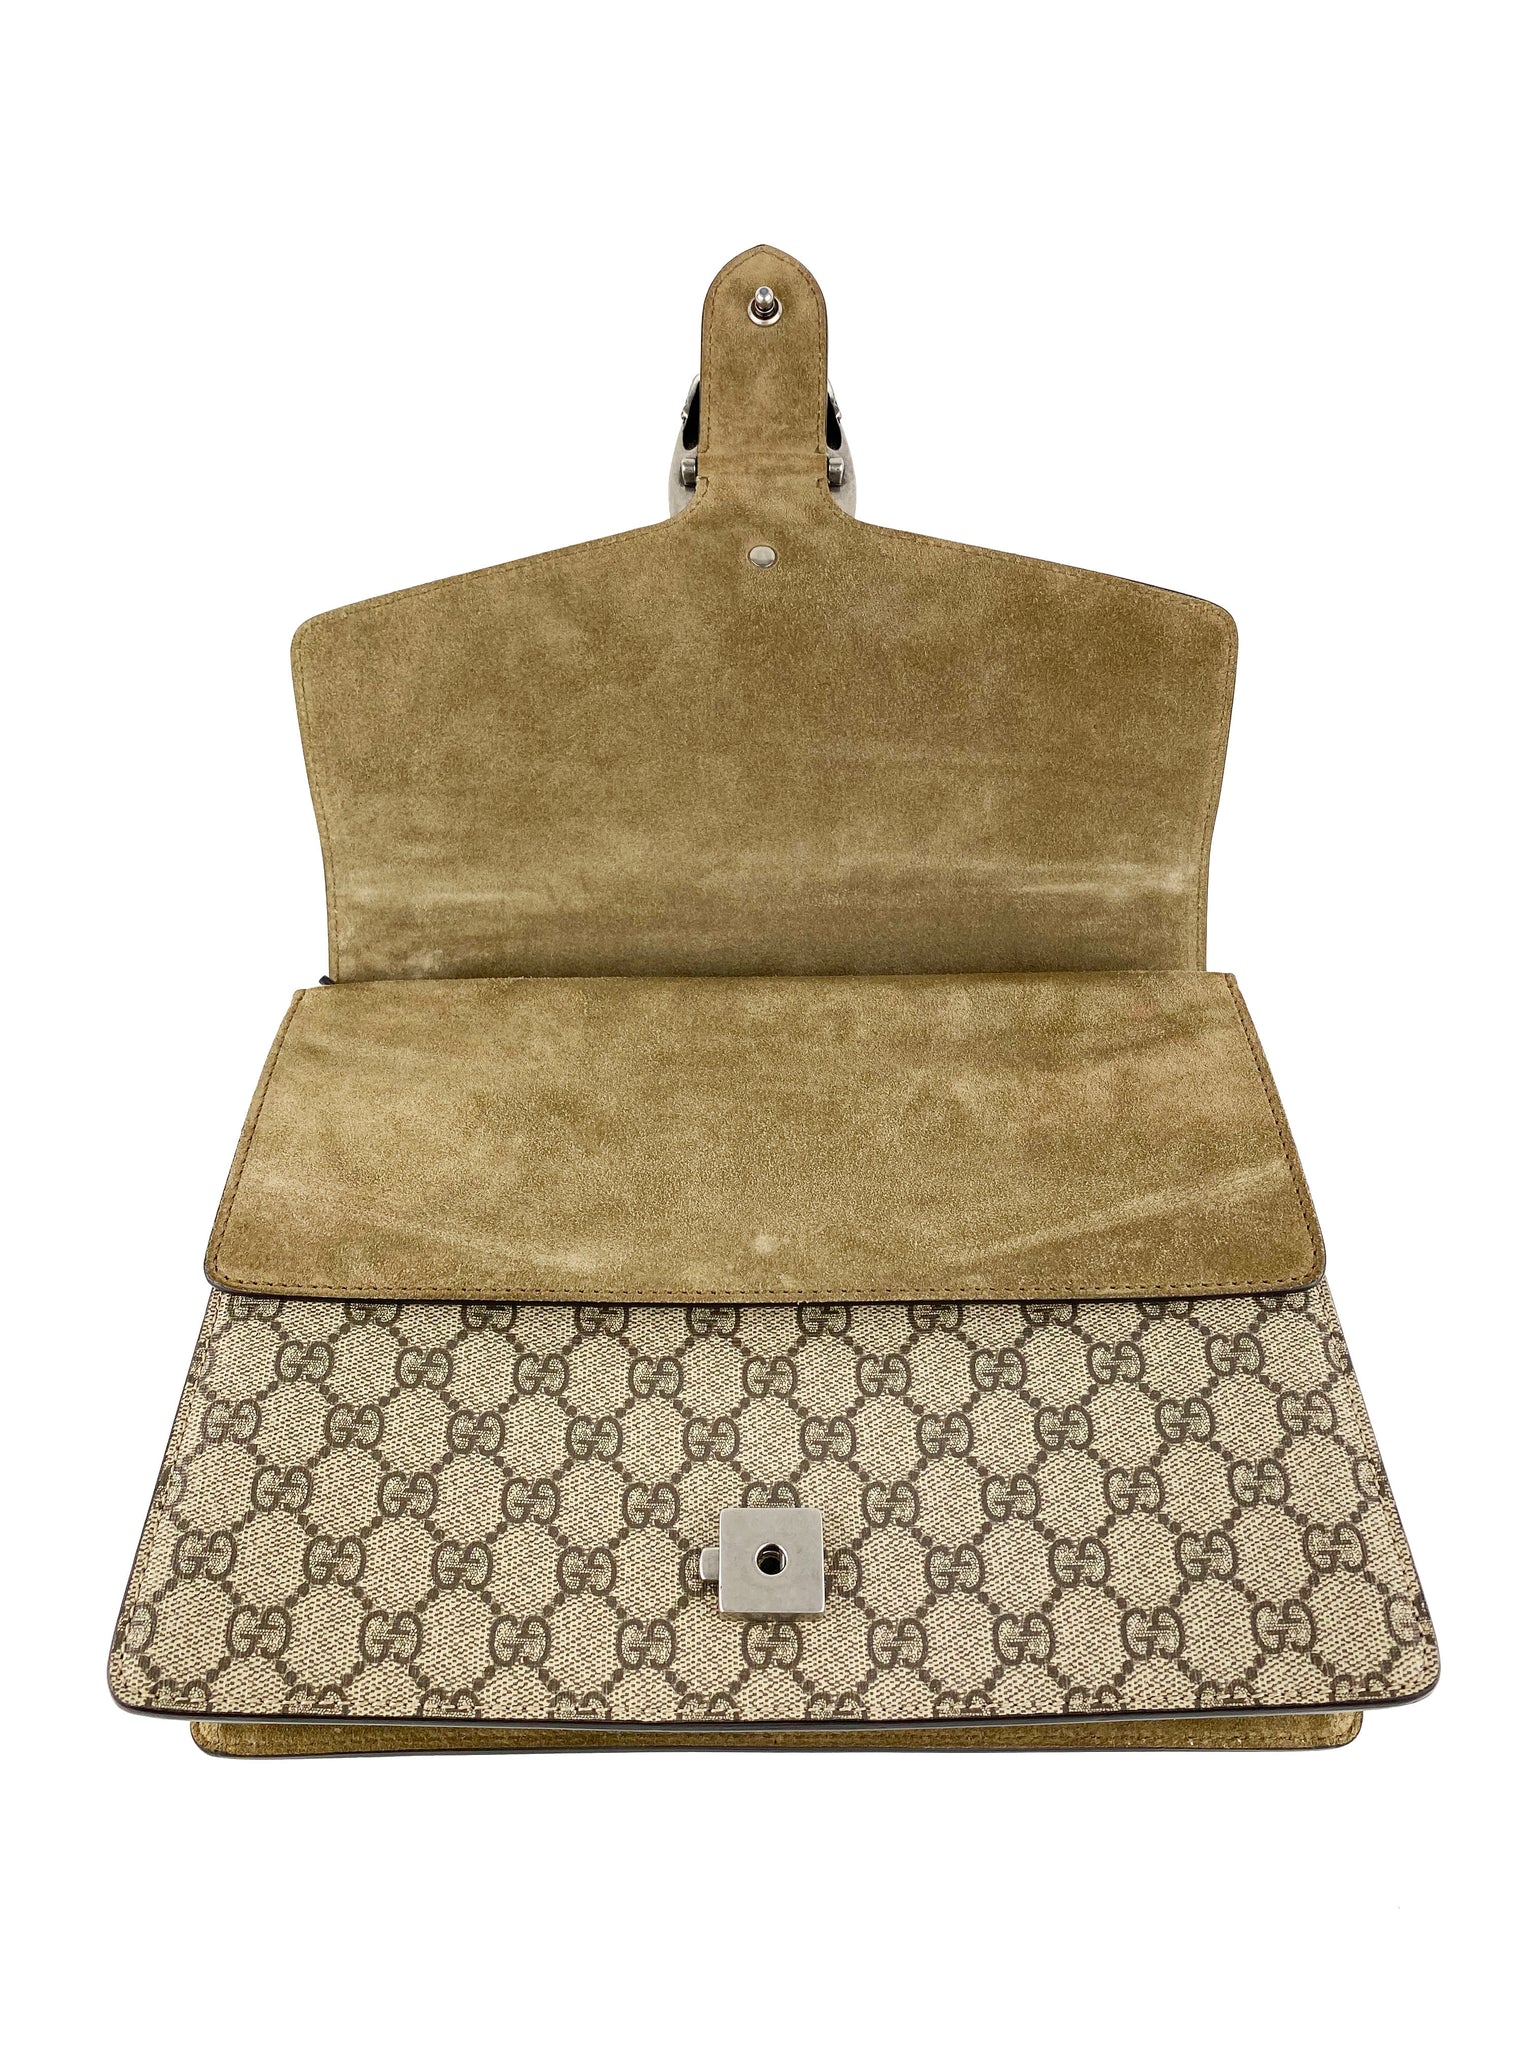 Gucci Dionysus Bag with Taupe Suede Trim